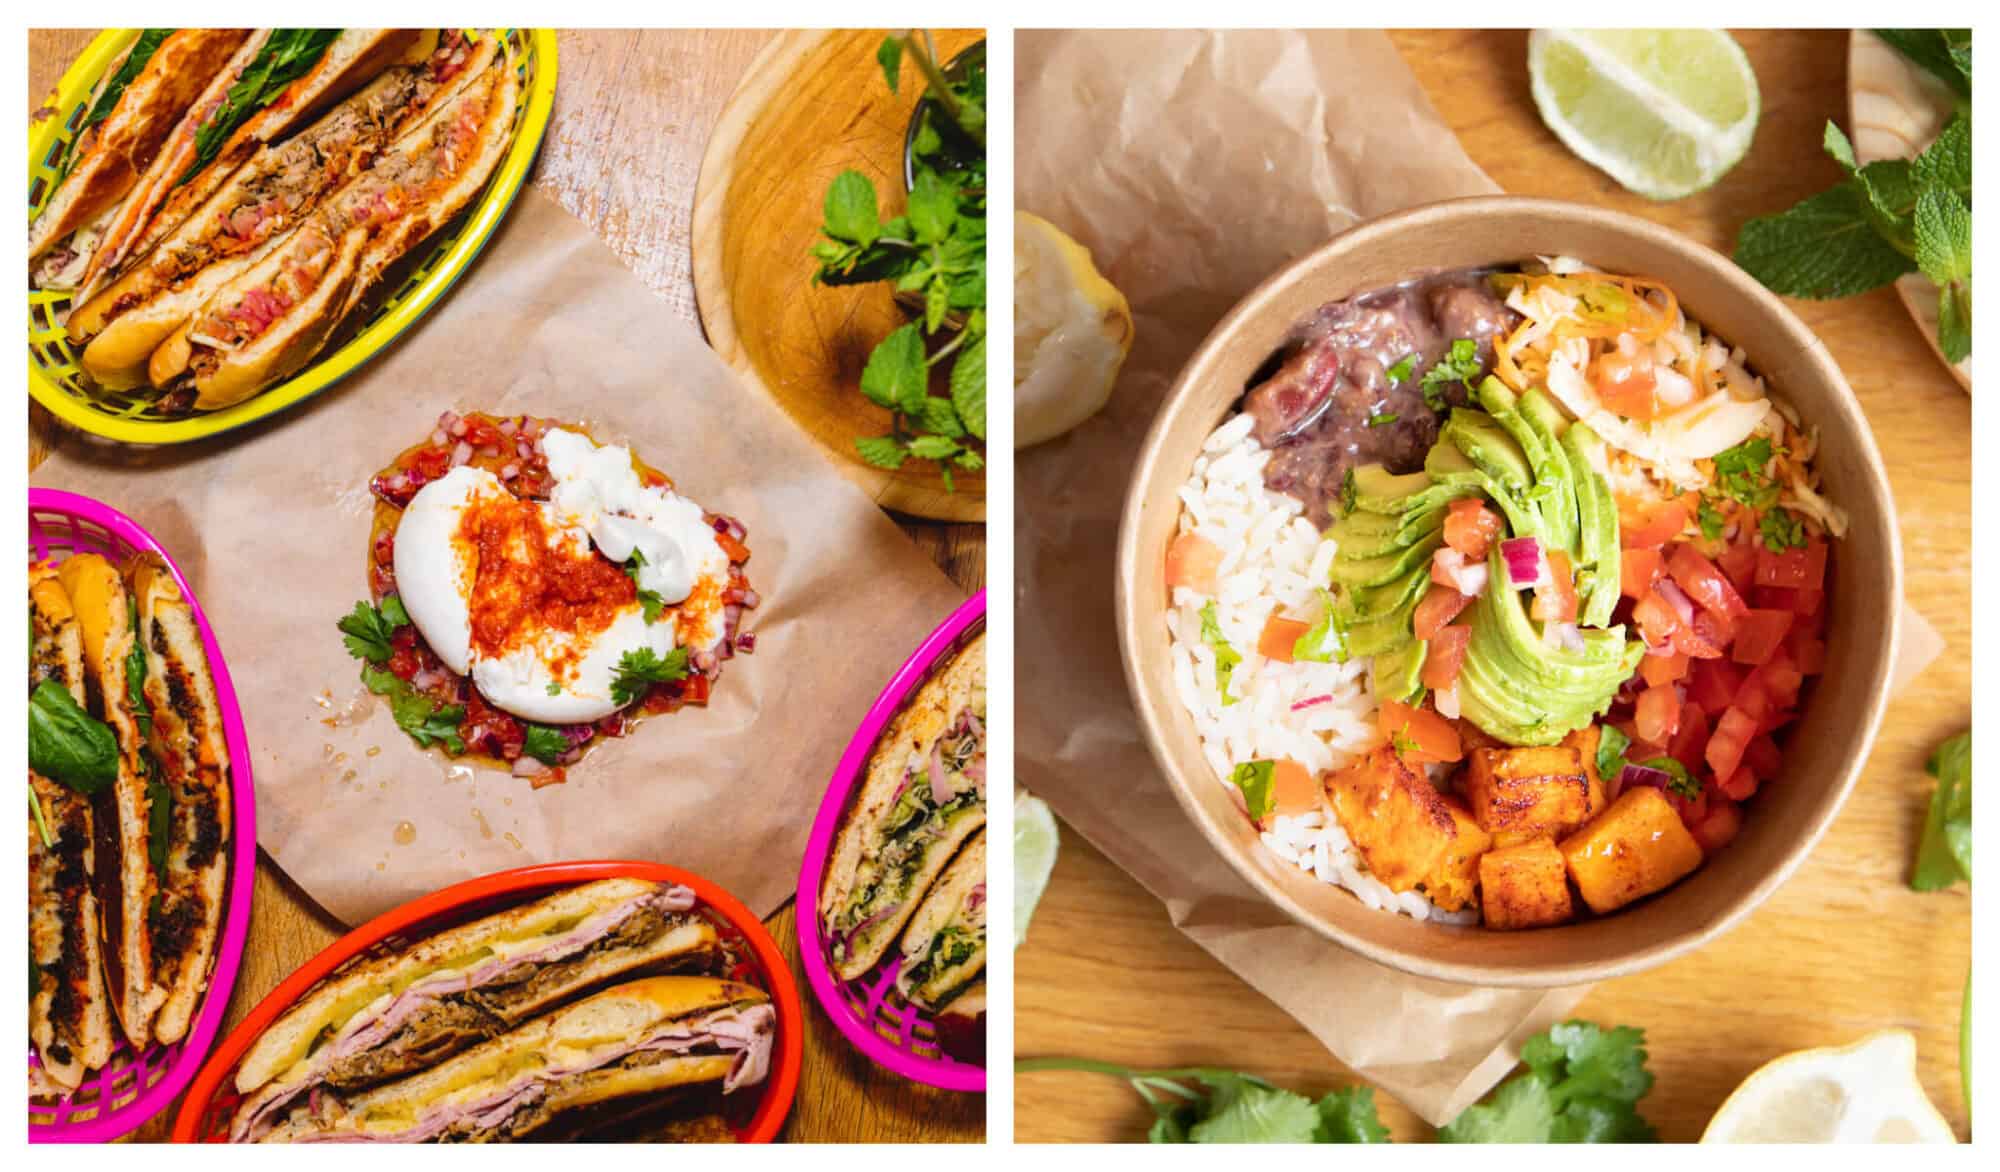 Left: A colorful table full of cuban bocadillos in different plates from the restaurant Little Havana in Paris. Right: A paper bowl with rice, tomatoes, avocado, beans and meat from the same Parisian restaurant.